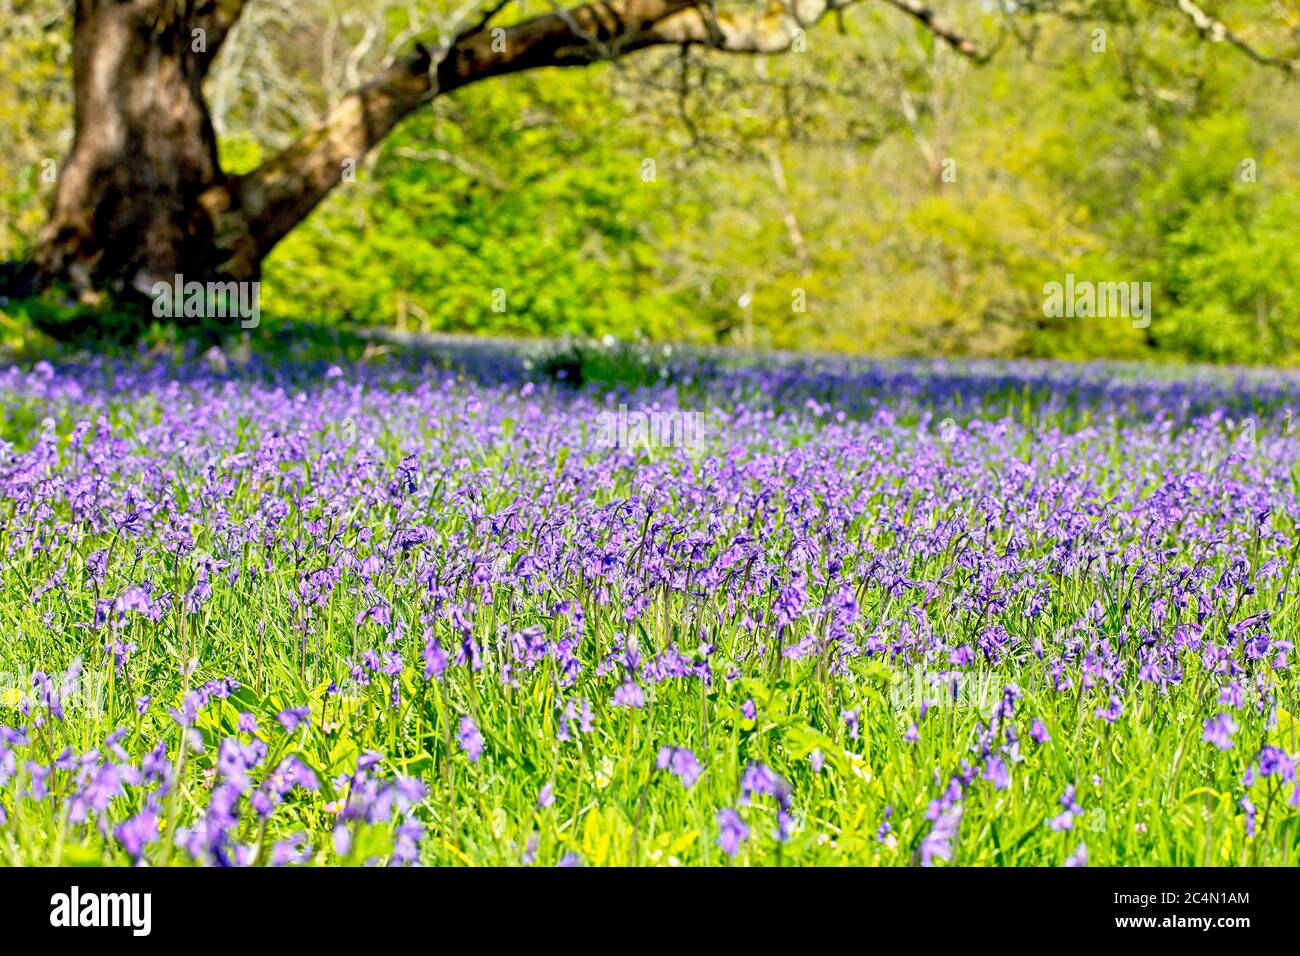 A mass of Bluebells (Hyacinthoides non-scripta) growing under trees at Enys House, Cornwall, England, UK. Stock Photo